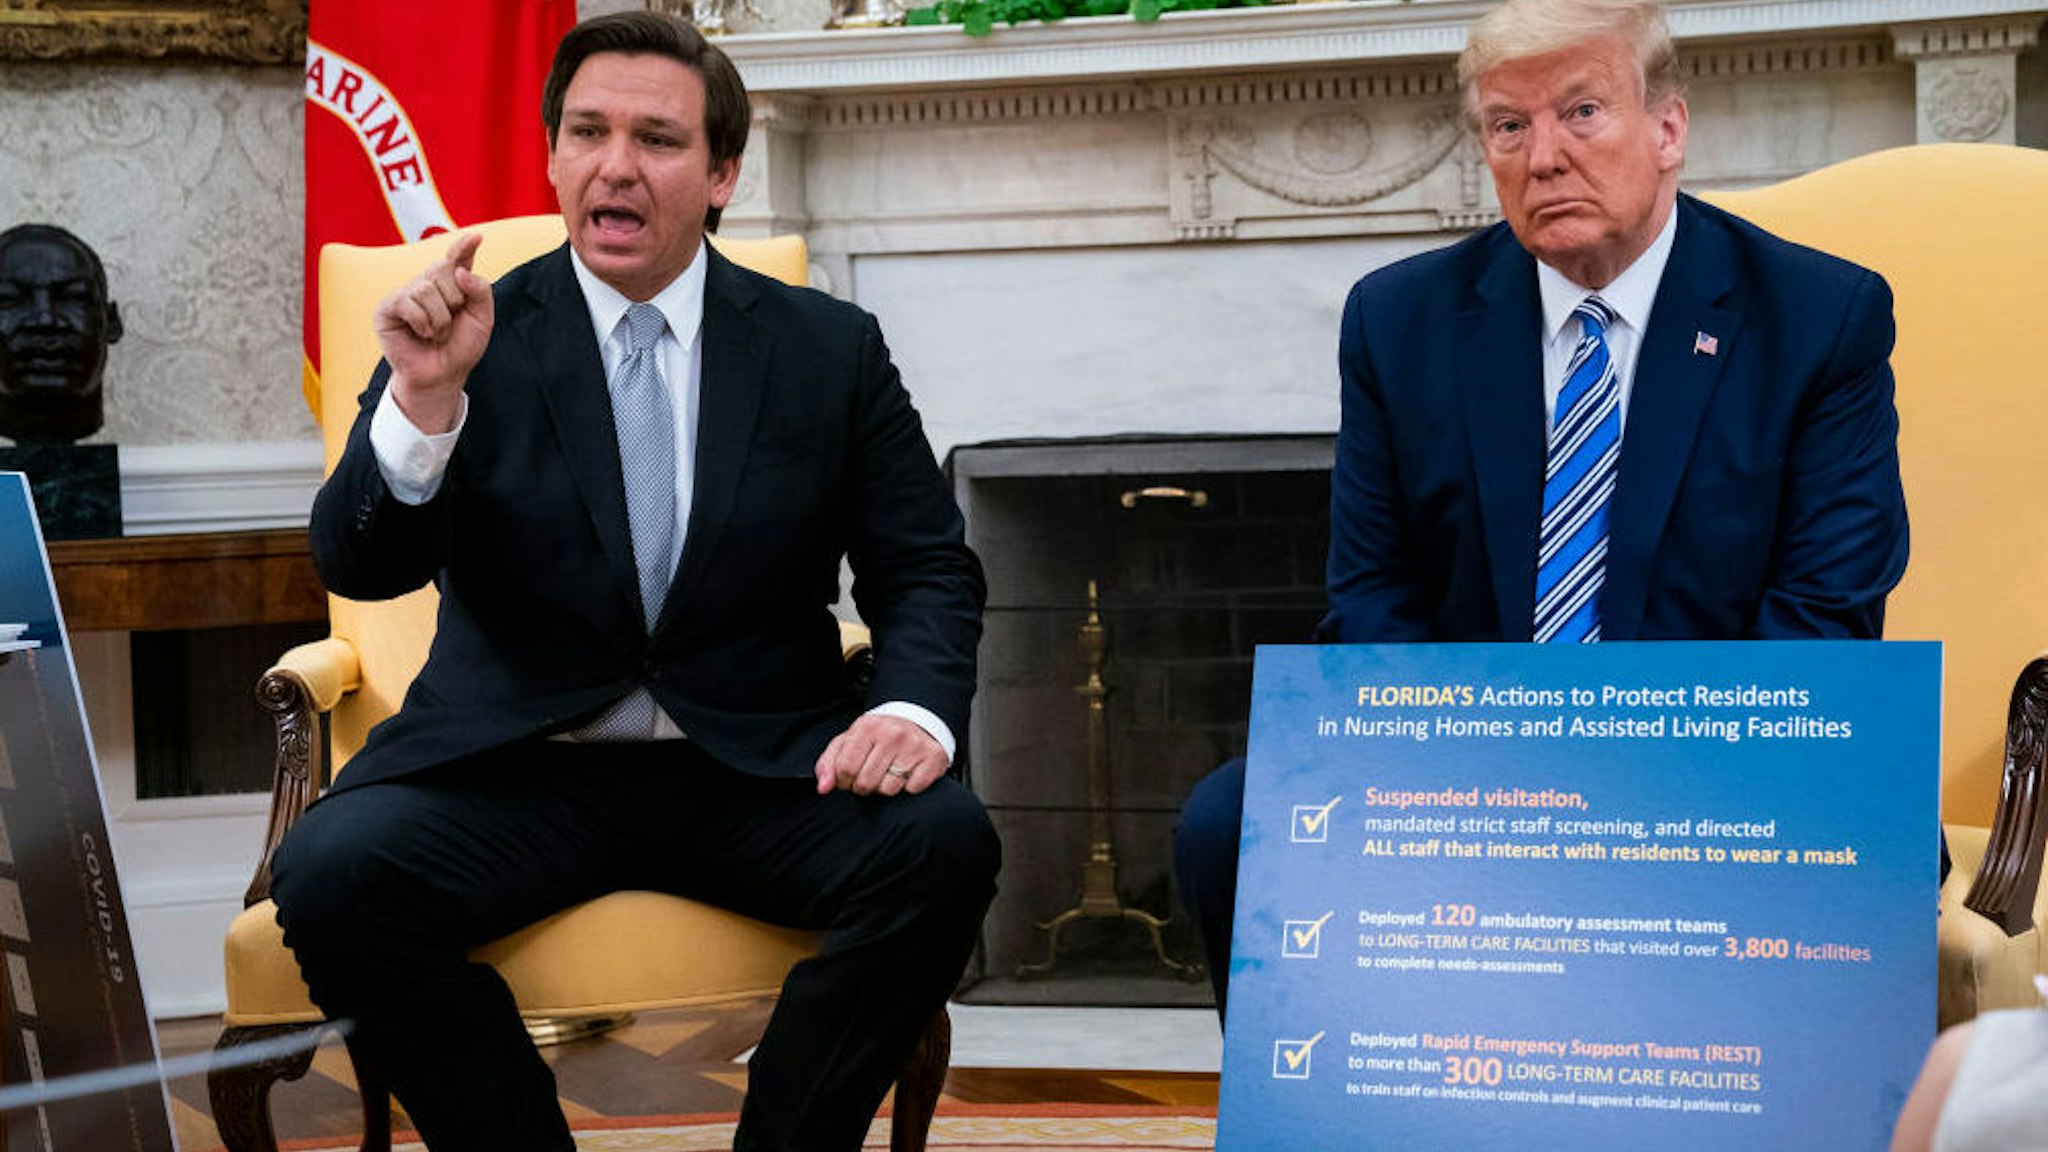 Florida Gov. Ron DeSantis (L) speaks while meeting with U.S. President Donald Trump in the Oval Office of the White House on April 28, 2020 in Washington, DC. Trump met with DeSantis to discuss ways that Florida is planning to gradually re-open the state in the wake of the COVID-19 pandemic.